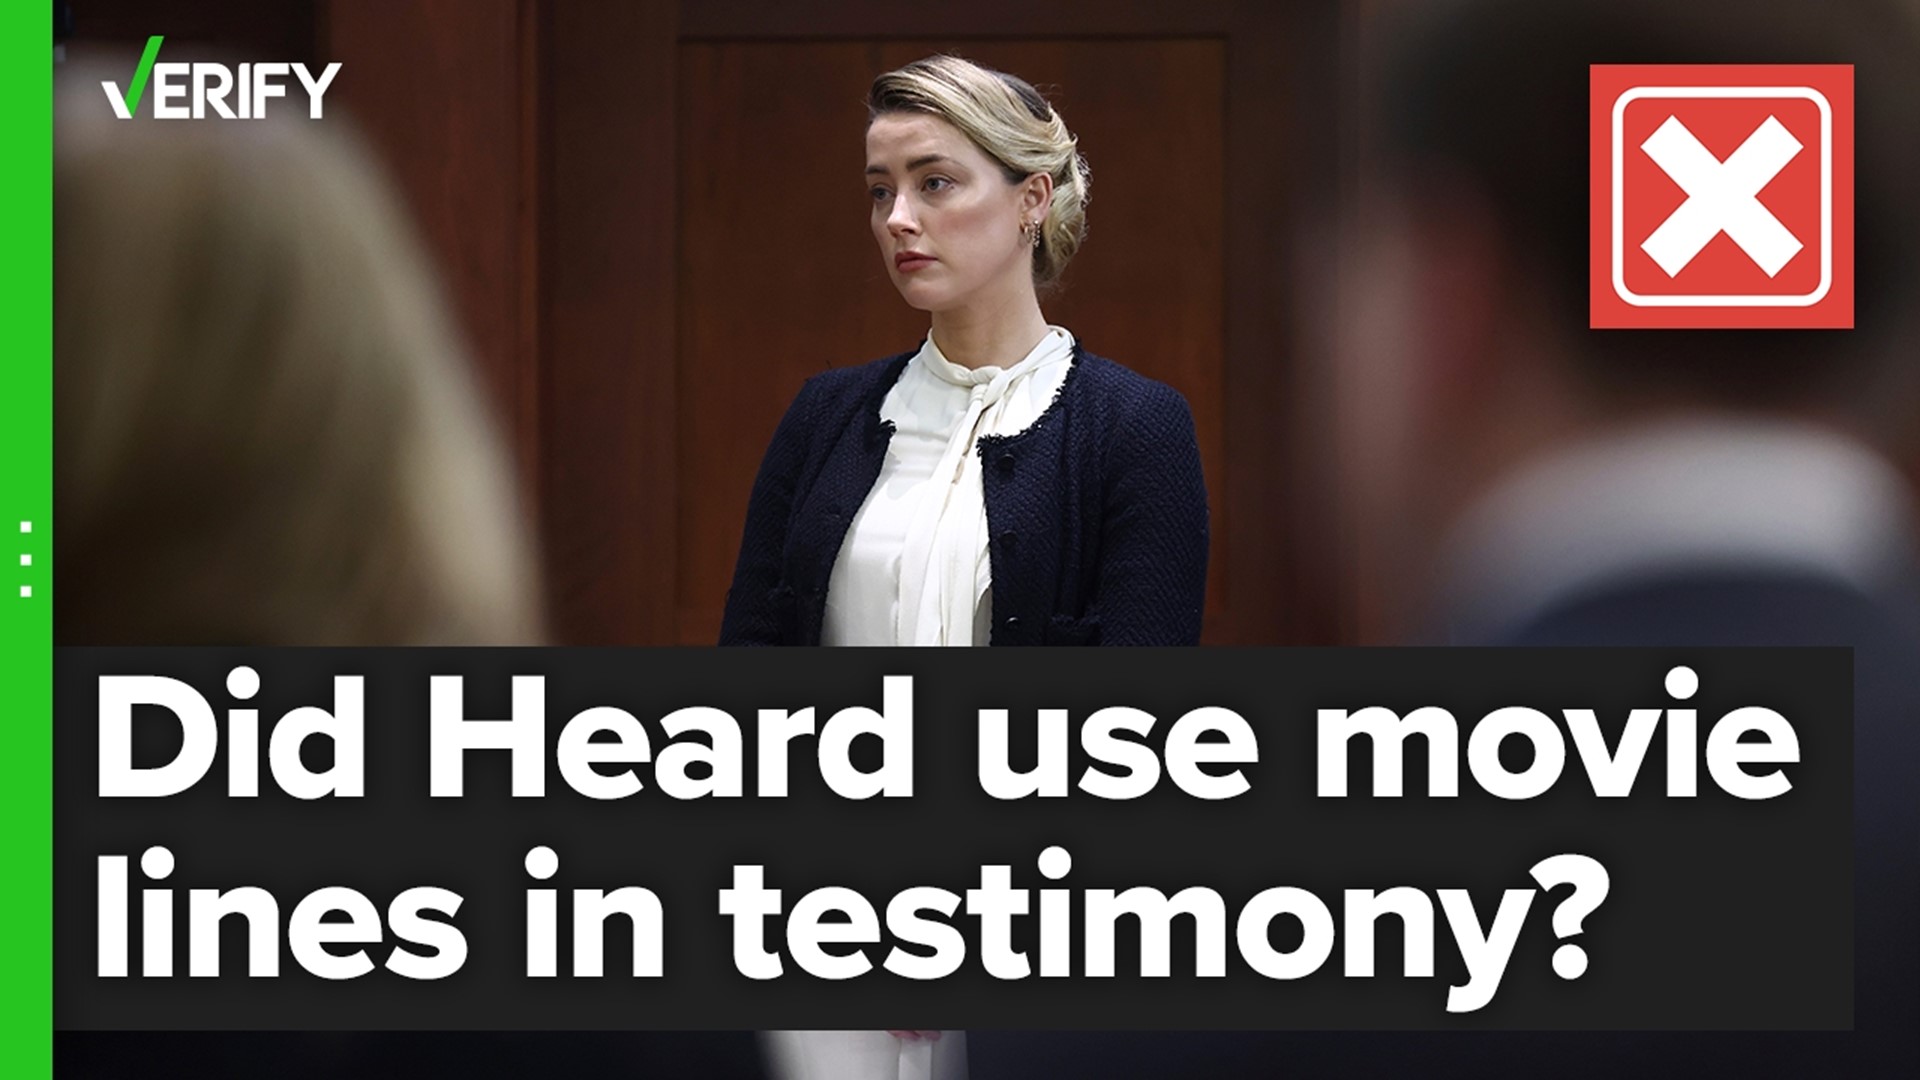 Actress Amber Heard did not quote lines from the 1999 movie “The Talented Mr. Ripley” during her testimony in a libel lawsuit, despite social media claims.